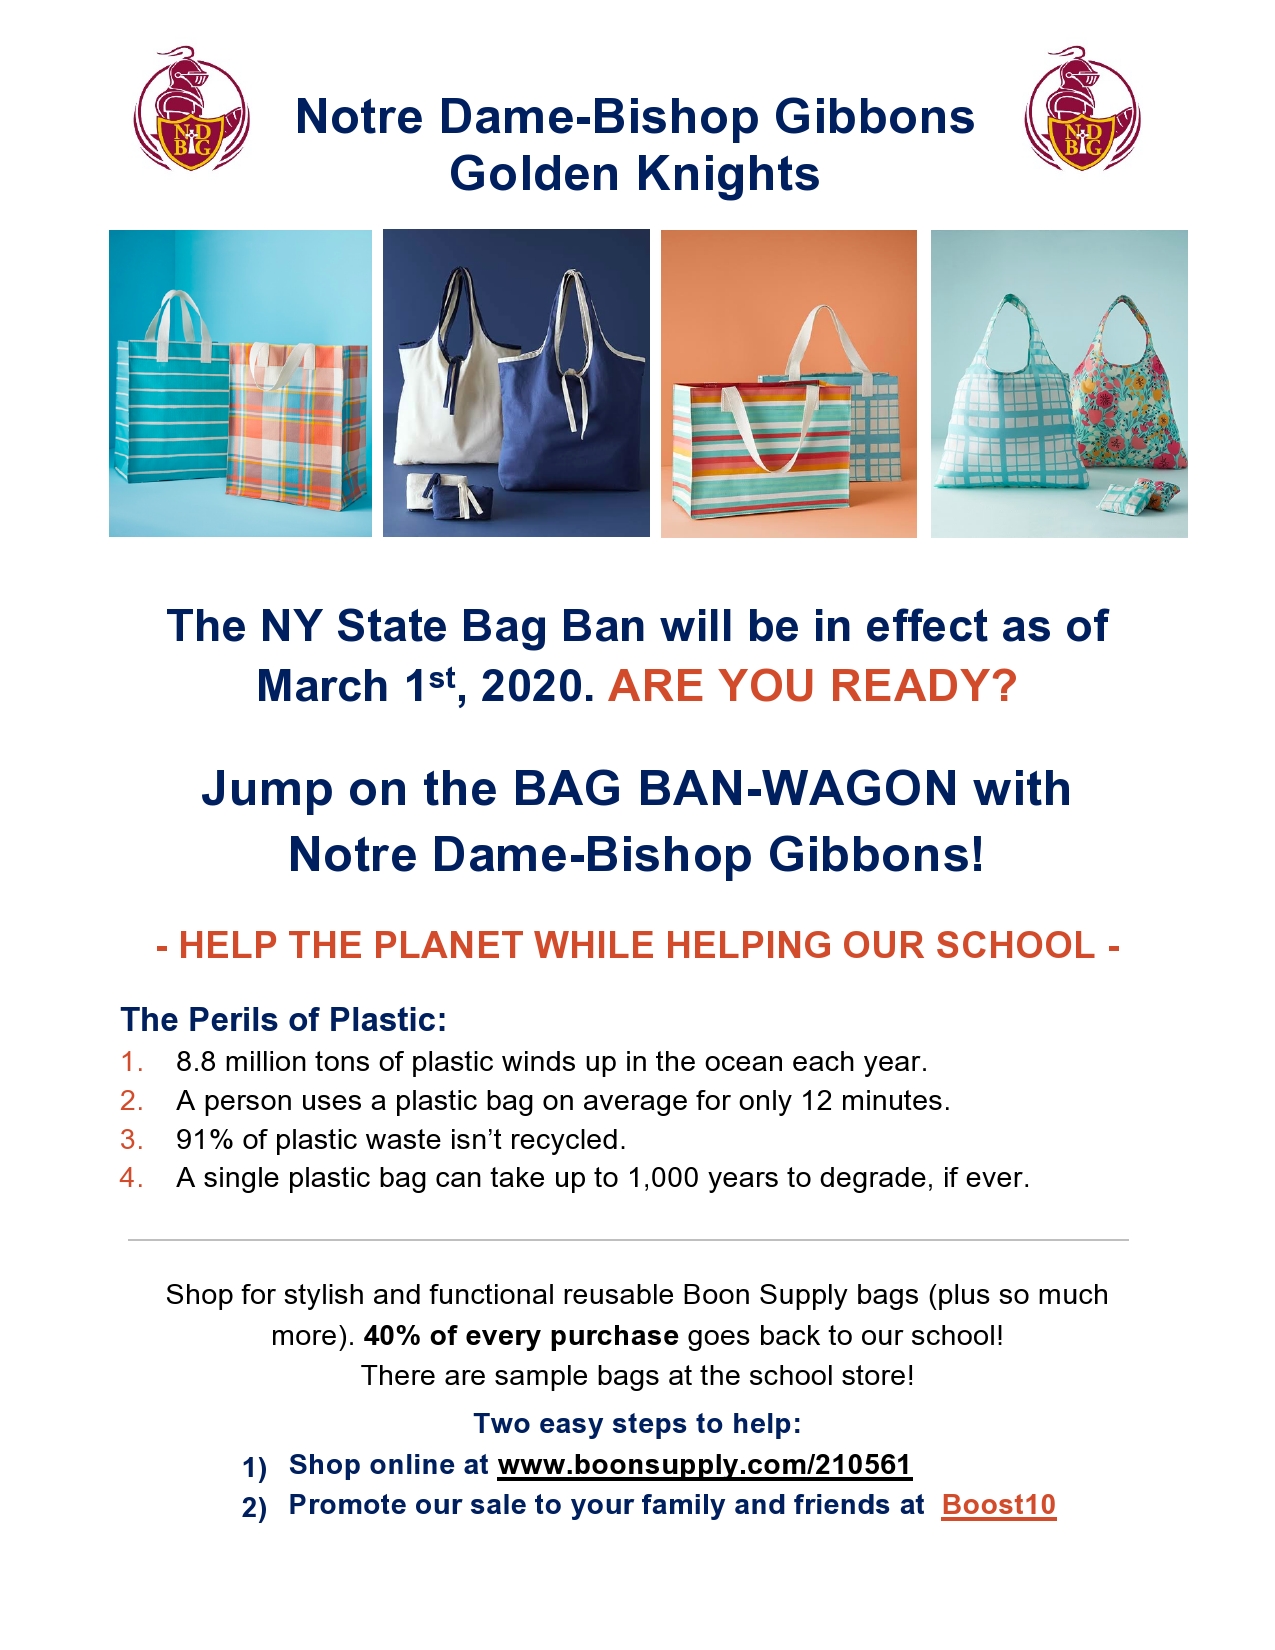 Boon Supply Bag Sale to Benefit ND-BG!